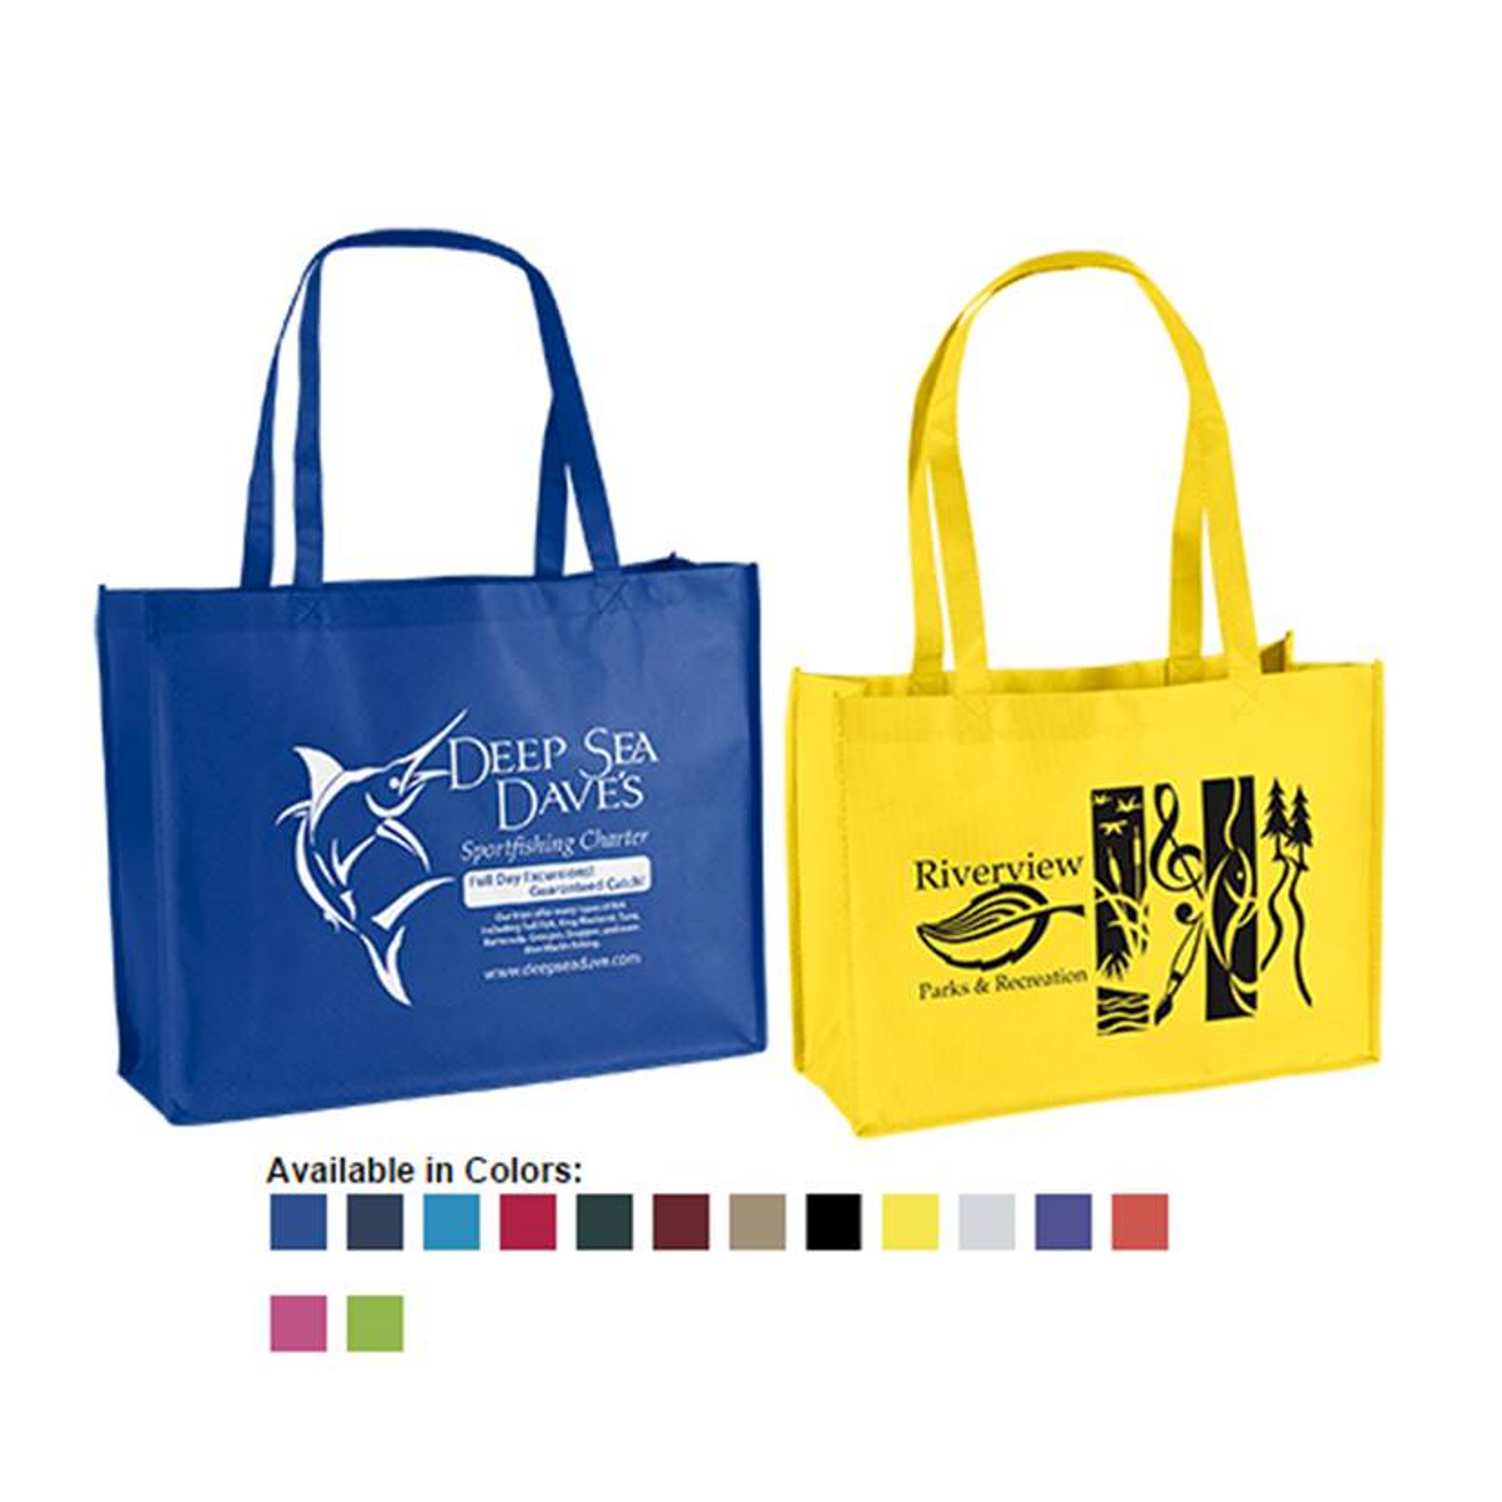 Recycled Tote | Sizes: 16x6x12 & 20x6x16